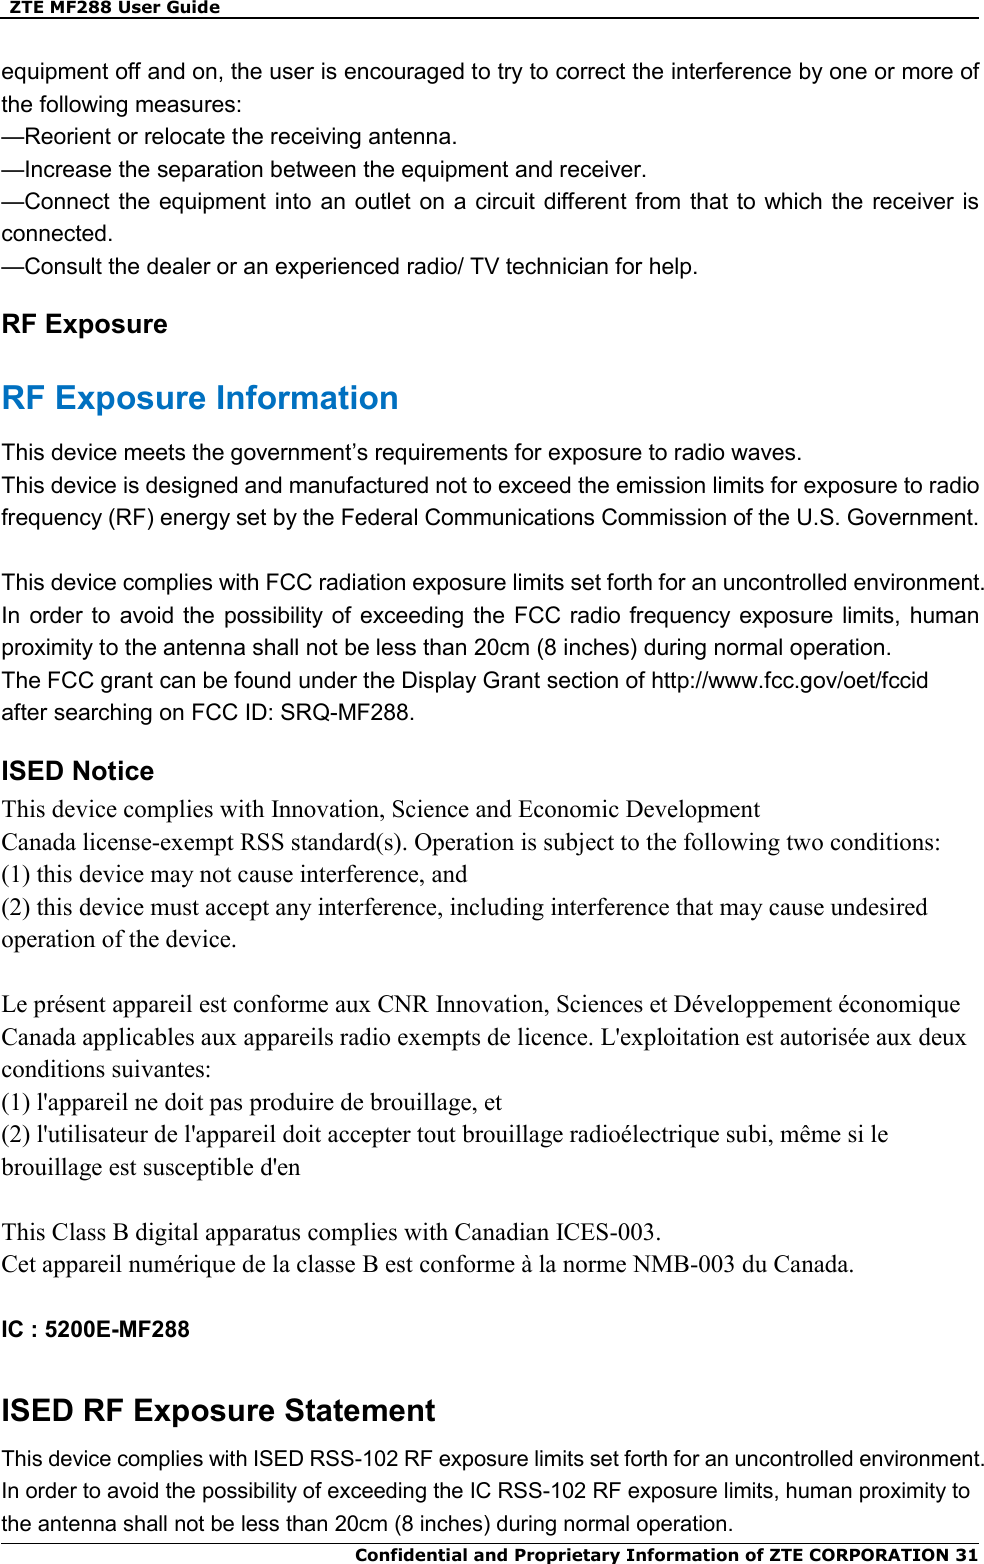   ZTE MF288 User Guide  Confidential and Proprietary Information of ZTE CORPORATION 31equipment off and on, the user is encouraged to try to correct the interference by one or more of the following measures: —Reorient or relocate the receiving antenna. —Increase the separation between the equipment and receiver. —Connect the equipment into an outlet on a circuit different from that to which the  receiver is connected. —Consult the dealer or an experienced radio/ TV technician for help. RF Exposure RF Exposure Information This device meets the government’s requirements for exposure to radio waves. This device is designed and manufactured not to exceed the emission limits for exposure to radio frequency (RF) energy set by the Federal Communications Commission of the U.S. Government.  This device complies with FCC radiation exposure limits set forth for an uncontrolled environment. In order to avoid the  possibility  of exceeding the FCC radio frequency exposure limits,  human proximity to the antenna shall not be less than 20cm (8 inches) during normal operation. The FCC grant can be found under the Display Grant section of http://www.fcc.gov/oet/fccid   after searching on FCC ID: SRQ-MF288. ISED Notice This device complies with Innovation, Science and Economic Development Canada license-exempt RSS standard(s). Operation is subject to the following two conditions: (1) this device may not cause interference, and   (2) this device must accept any interference, including interference that may cause undesired operation of the device.  Le présent appareil est conforme aux CNR Innovation, Sciences et Développement économique Canada applicables aux appareils radio exempts de licence. L&apos;exploitation est autorisée aux deux conditions suivantes:   (1) l&apos;appareil ne doit pas produire de brouillage, et   (2) l&apos;utilisateur de l&apos;appareil doit accepter tout brouillage radioélectrique subi, même si le brouillage est susceptible d&apos;en  This Class B digital apparatus complies with Canadian ICES-003. Cet appareil numérique de la classe B est conforme à la norme NMB-003 du Canada.  IC : 5200E-MF288  ISED RF Exposure Statement This device complies with ISED RSS-102 RF exposure limits set forth for an uncontrolled environment. In order to avoid the possibility of exceeding the IC RSS-102 RF exposure limits, human proximity to the antenna shall not be less than 20cm (8 inches) during normal operation. 